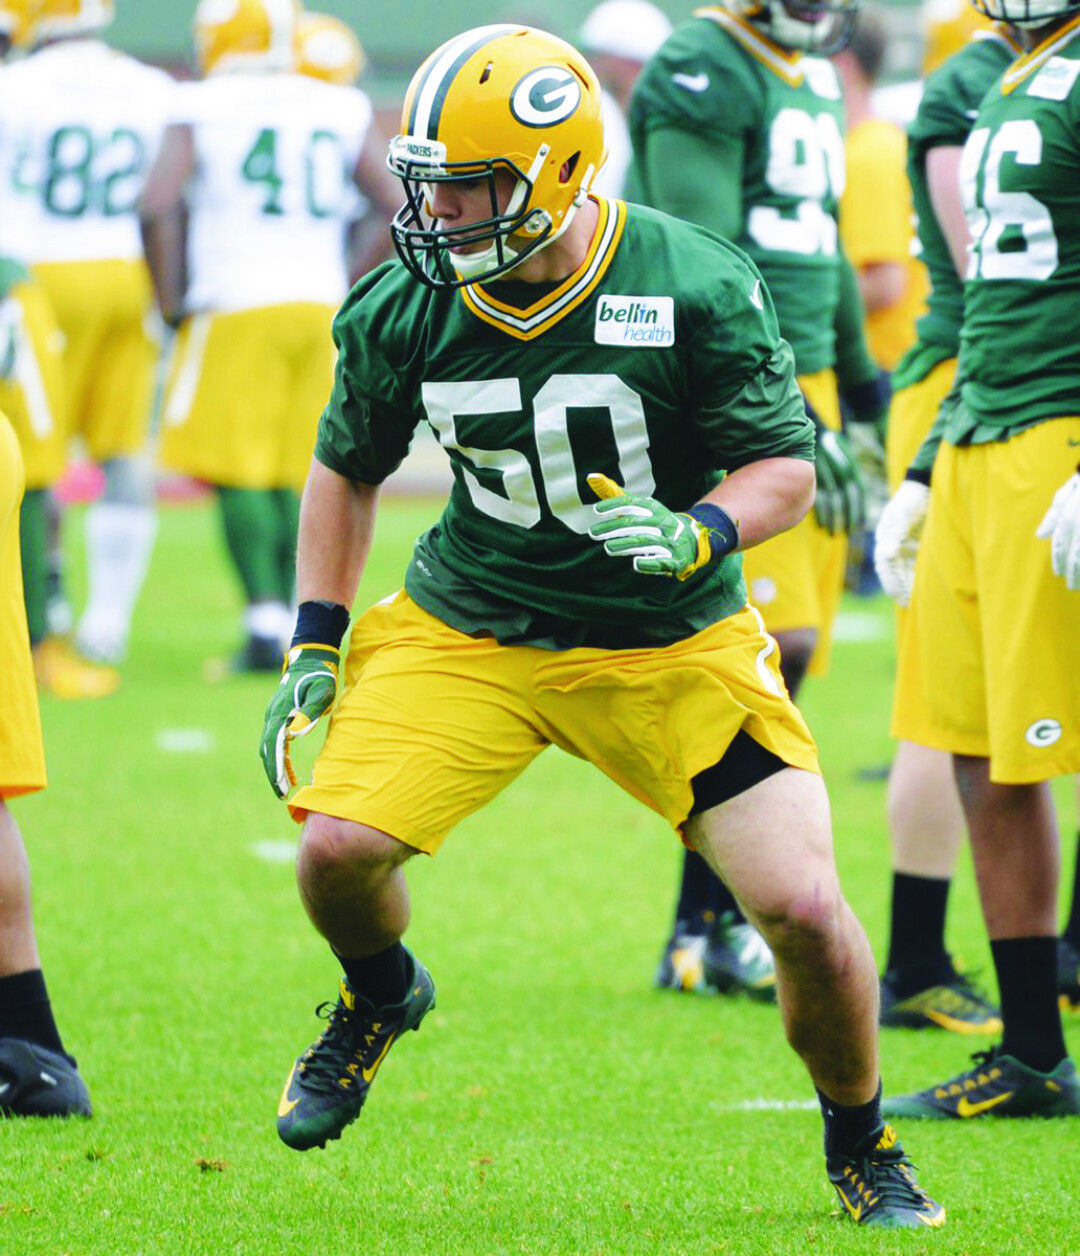 Keep an eye on Packers rookie linebacker Blake Martinez, as he has the skills and talent to have a breakout first year.